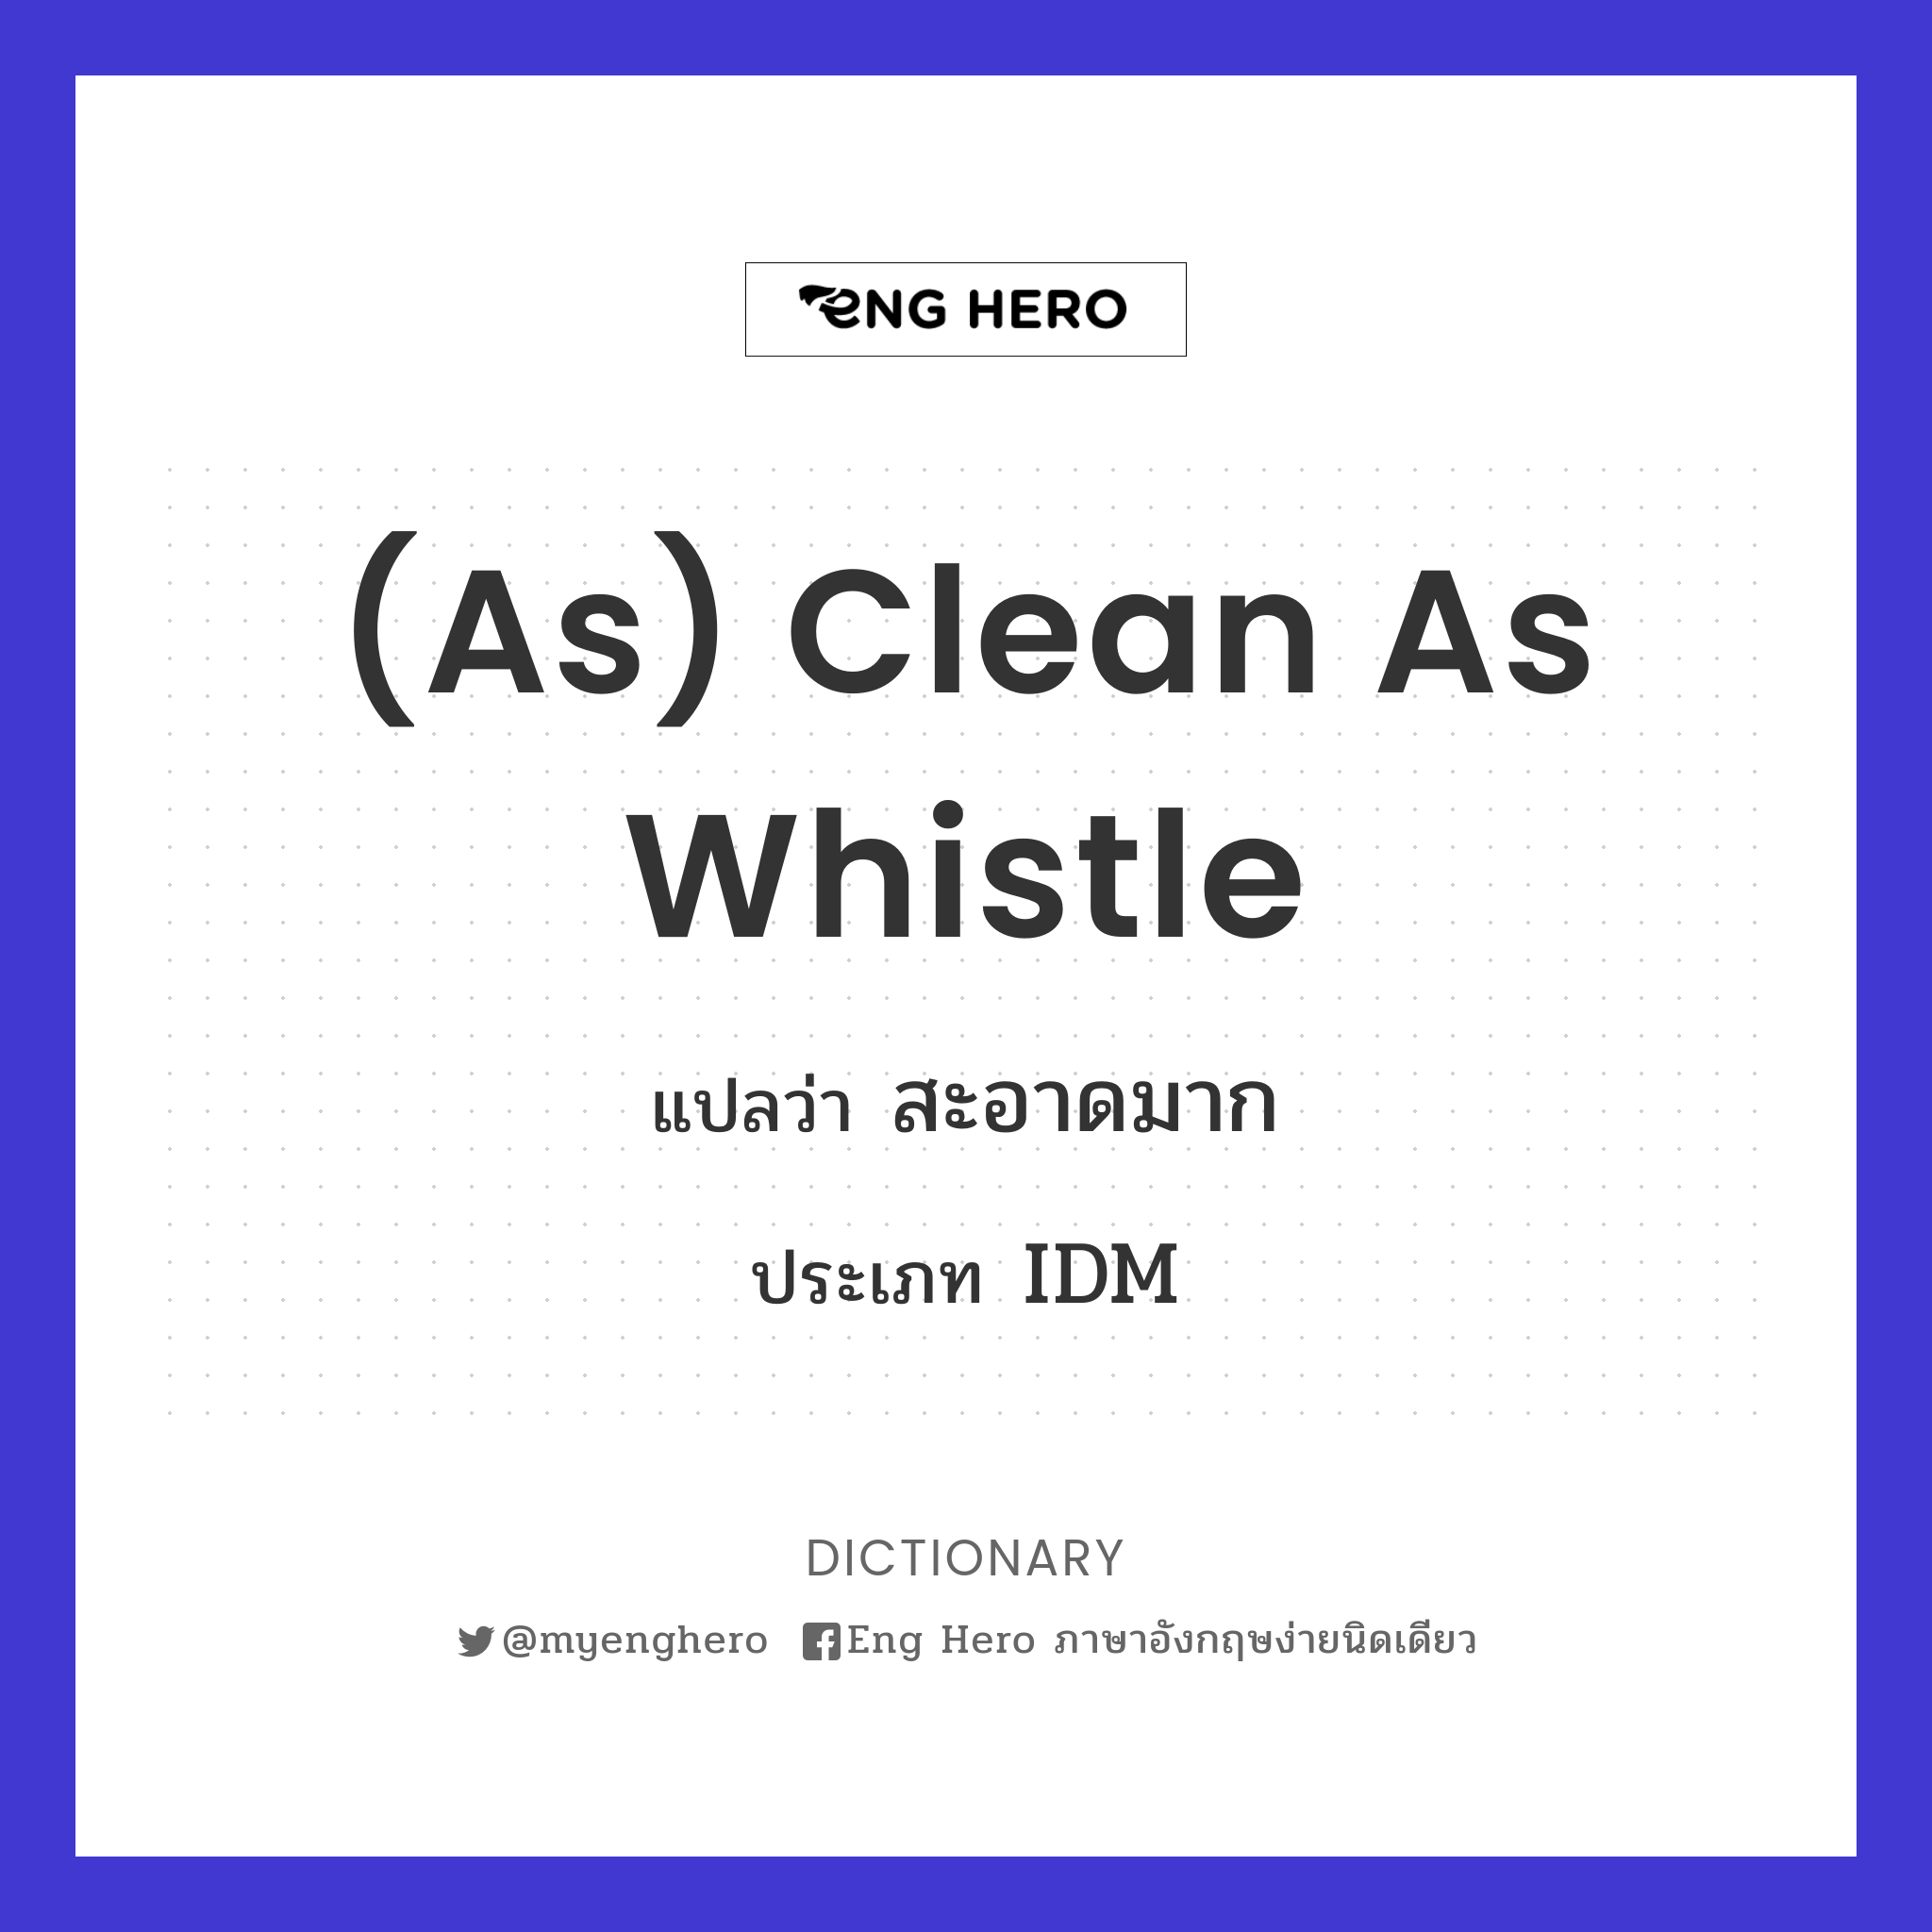 (as) clean as whistle